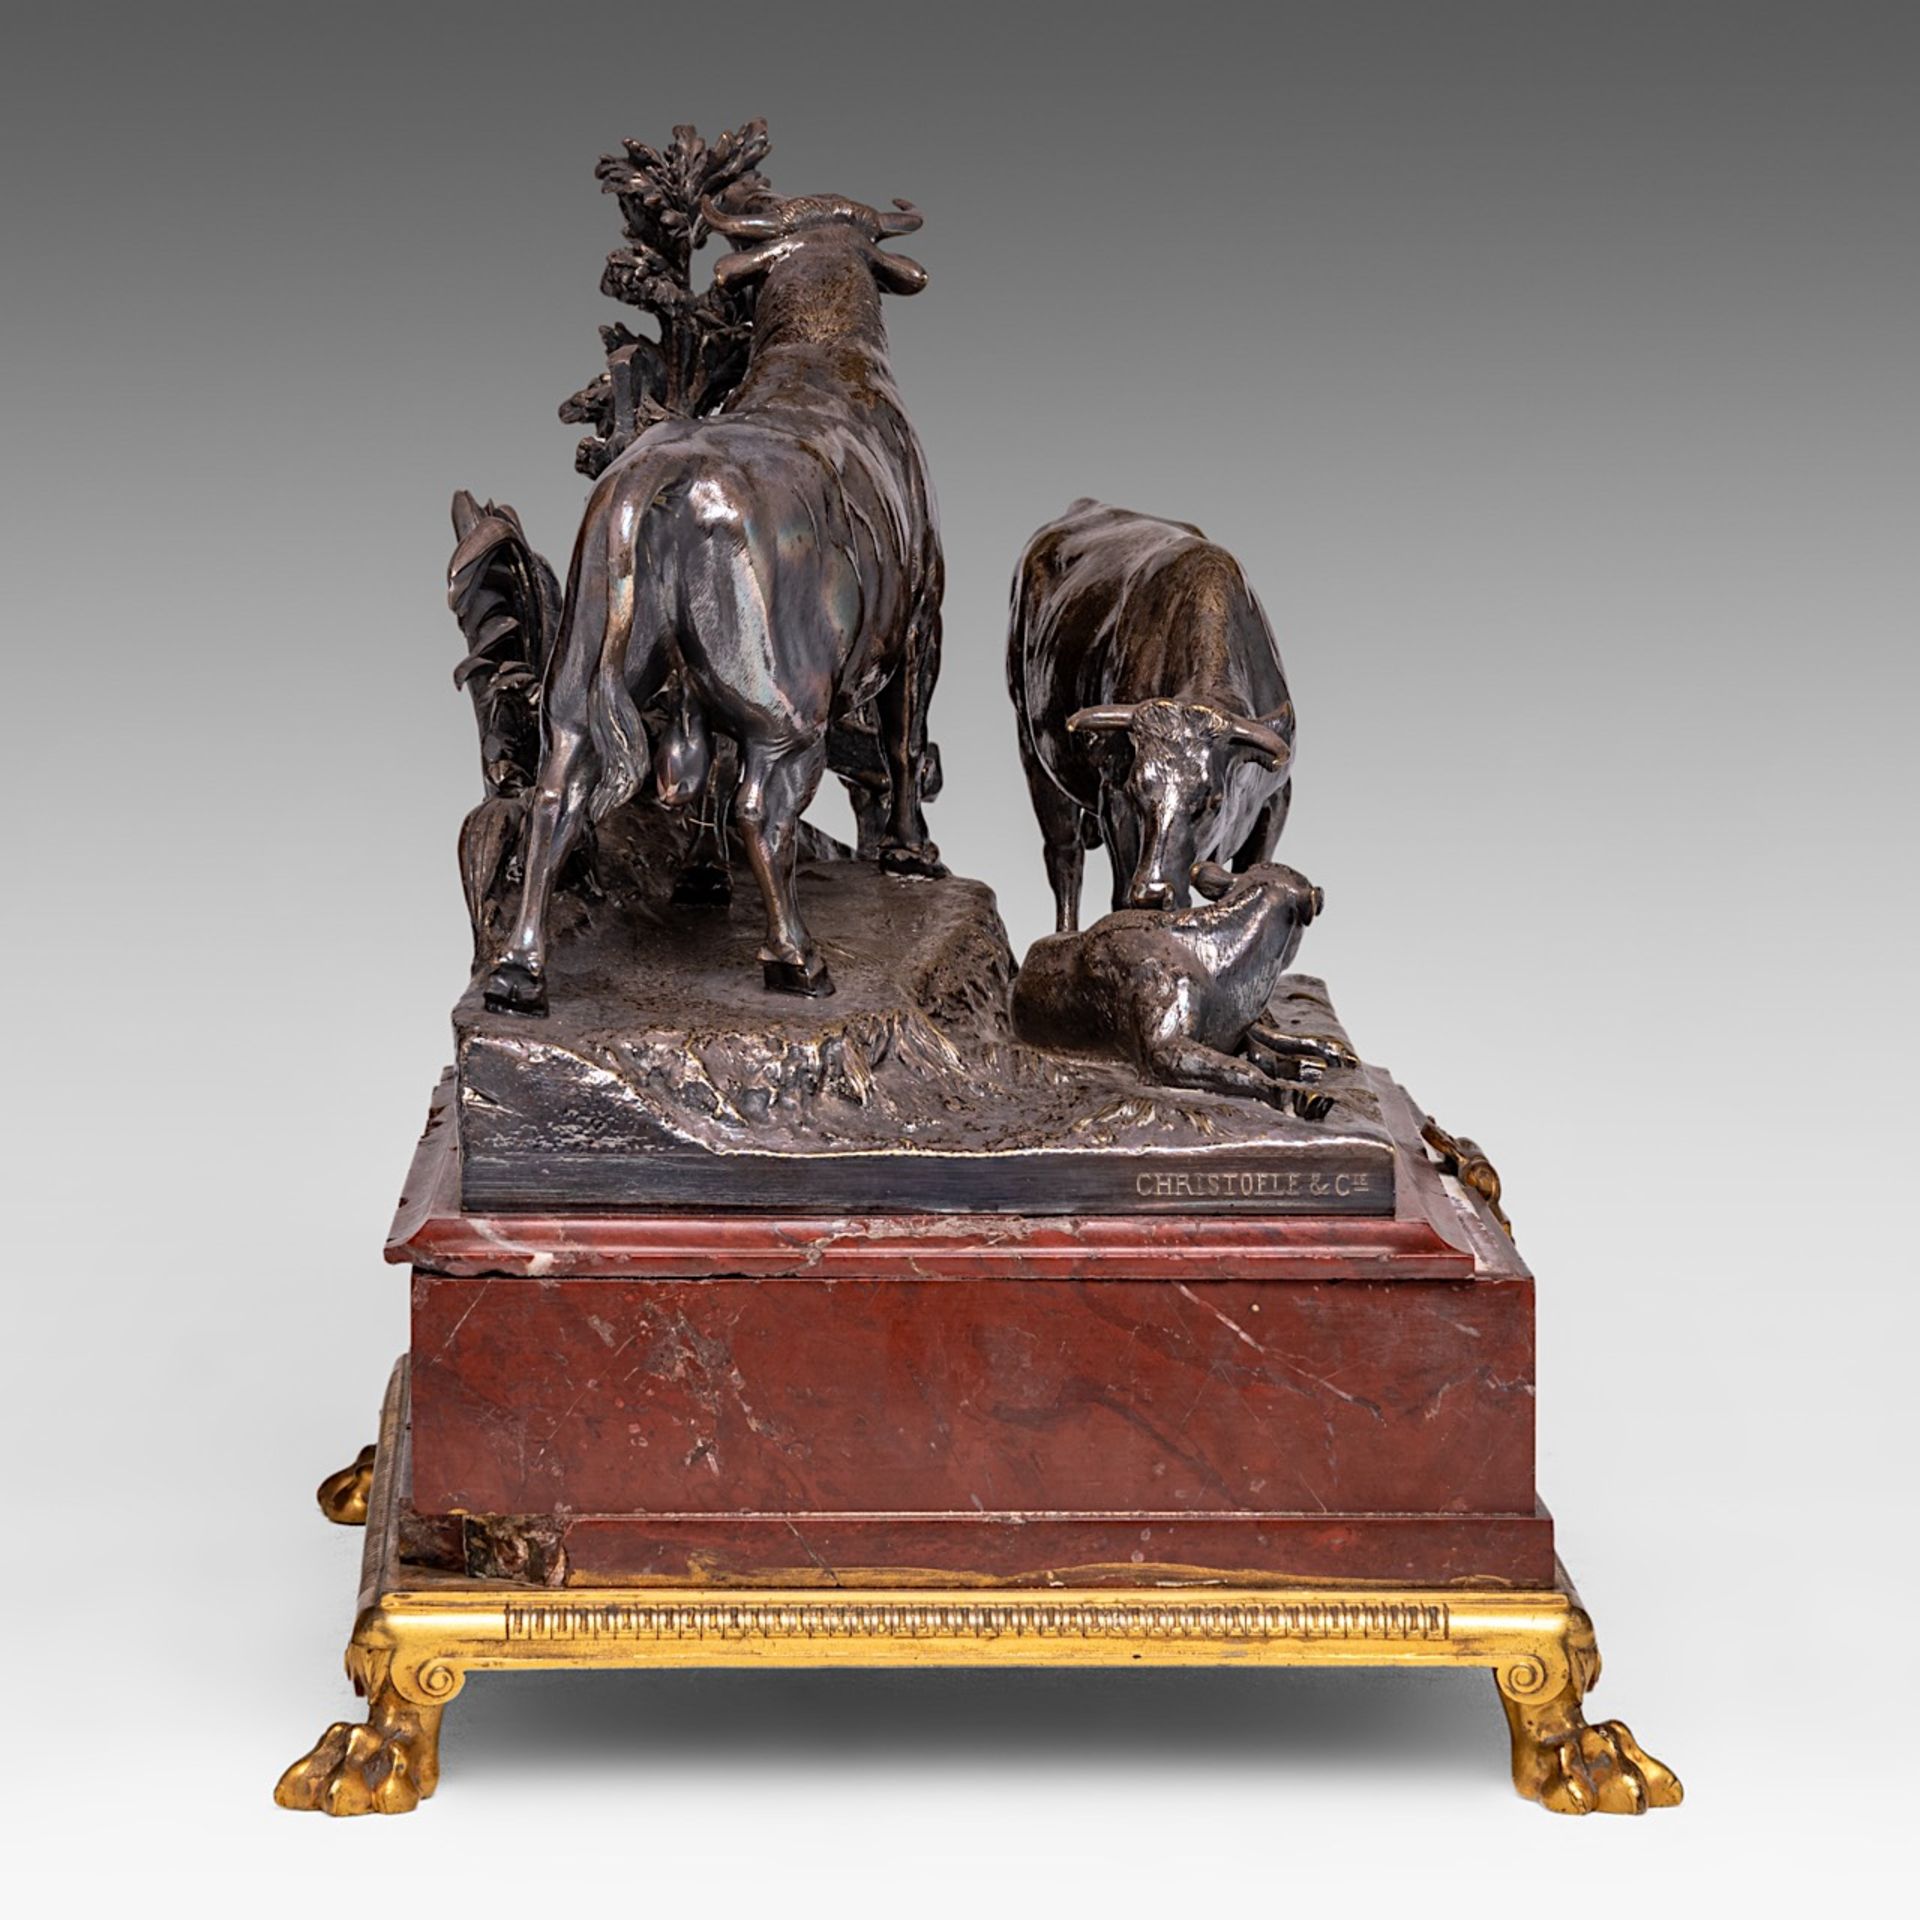 Louis-Pierre Rouillard (1820-1881), a silver-plated bronze group of a bull, a cow and a calf, cast b - Image 5 of 7